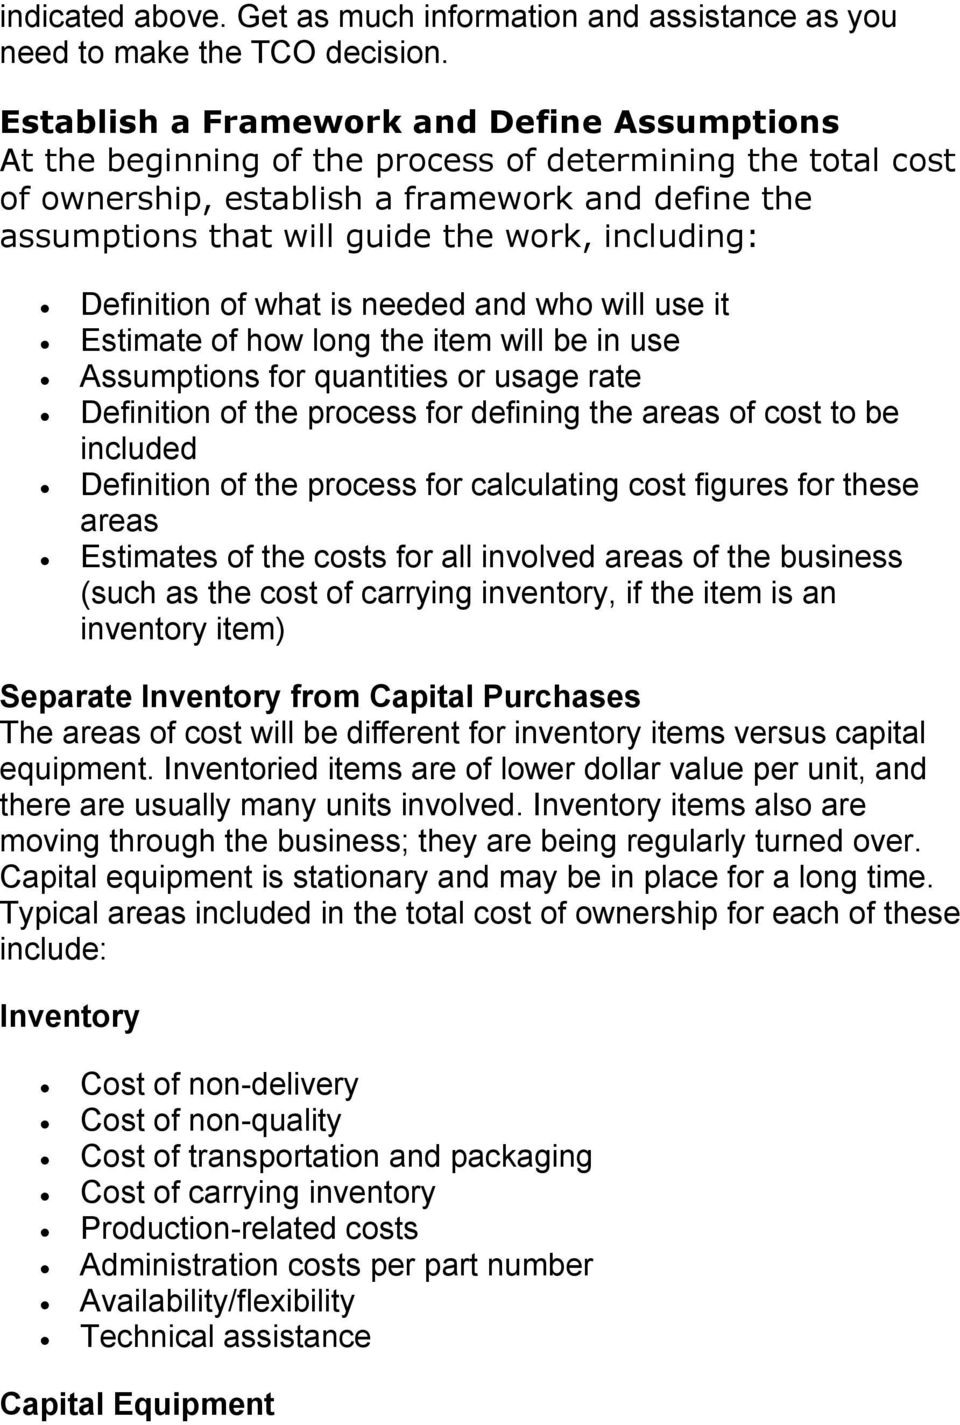 Total Cost Of Ownership  Pdf